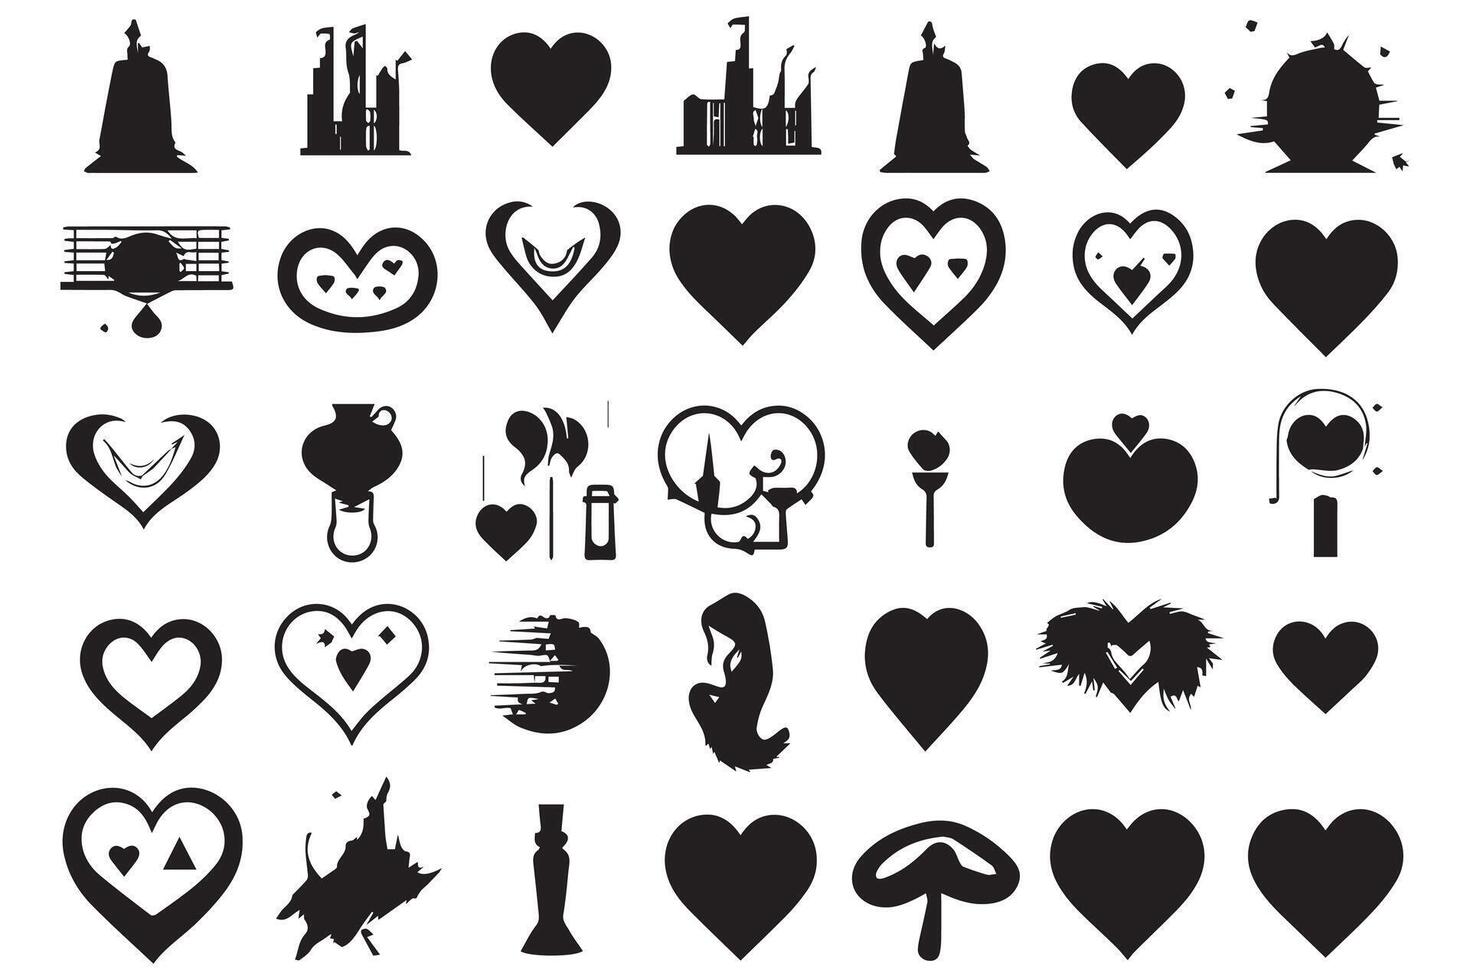 bundle of hearts love set icons silhouette illustration design free vector